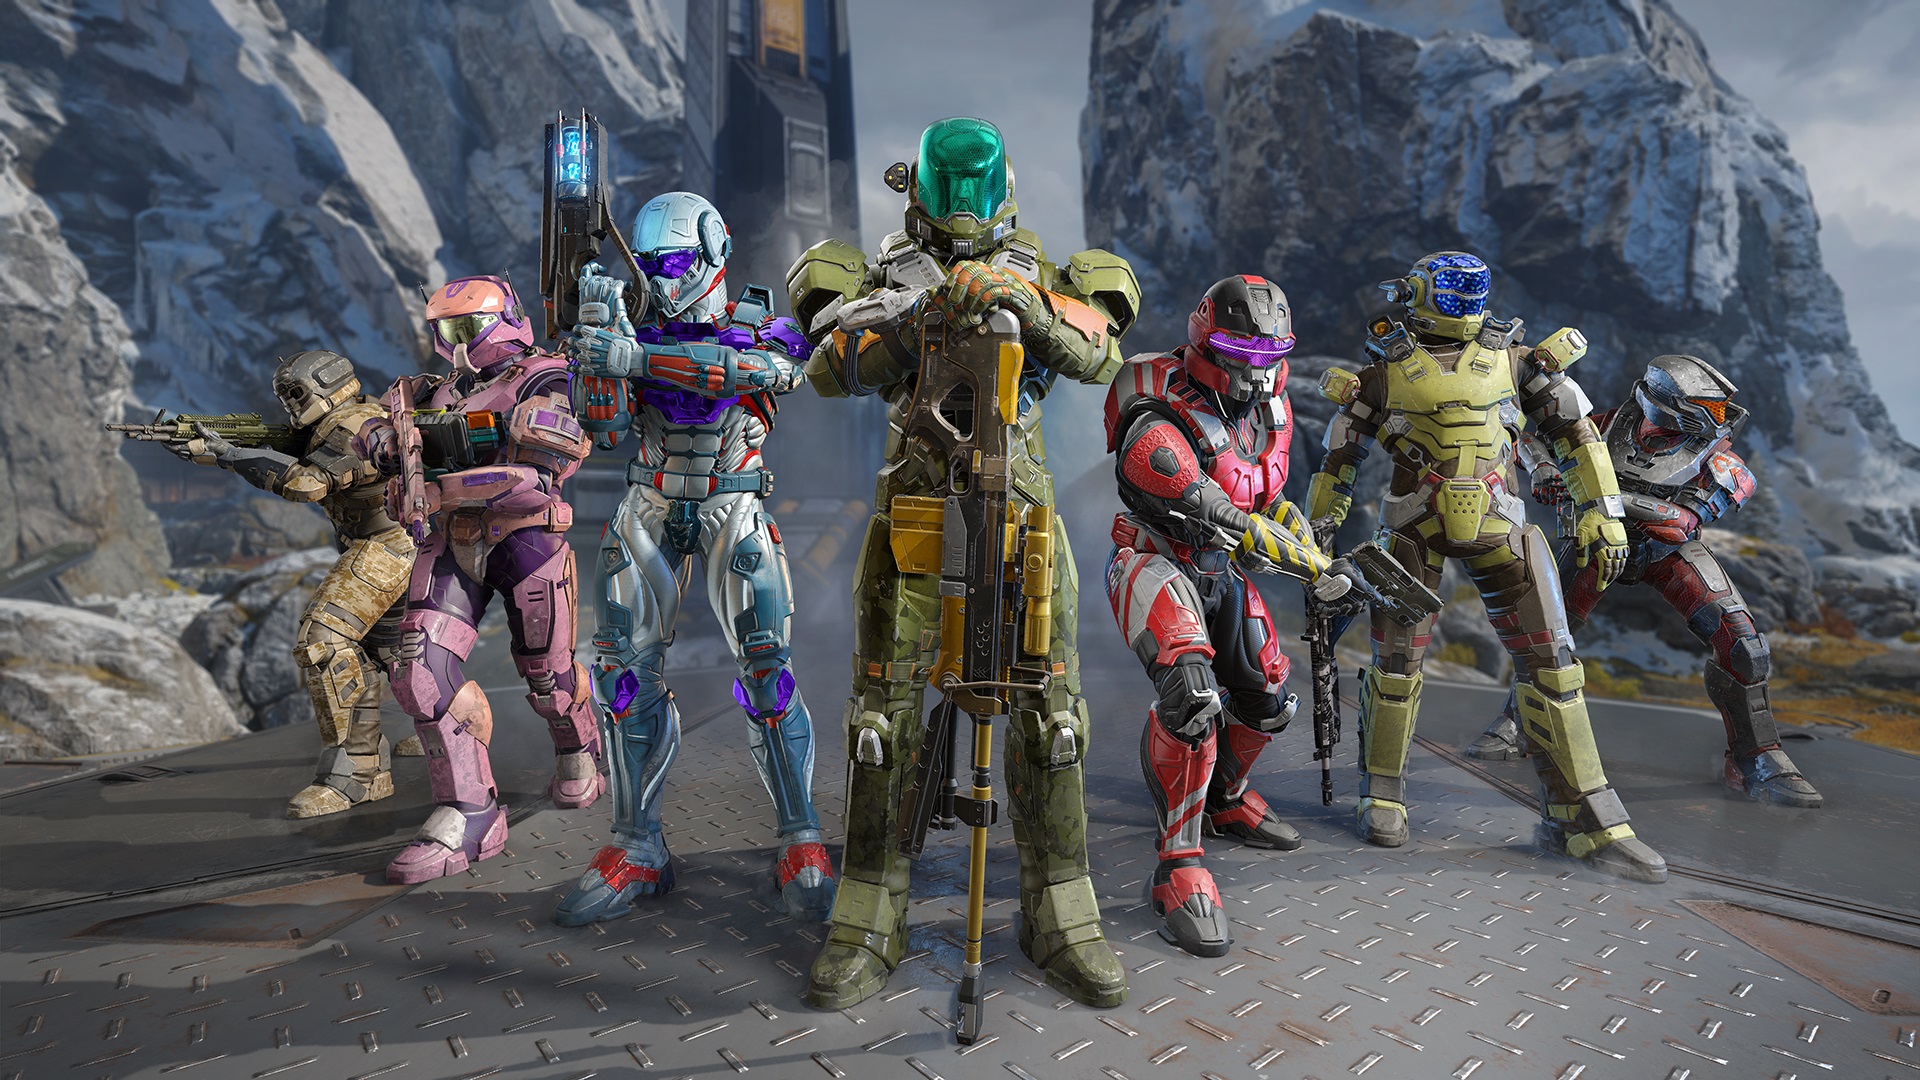 Header image for Halo Infinite Season 3 Customization Preview showing a variety of Spartans on Cliffhanger